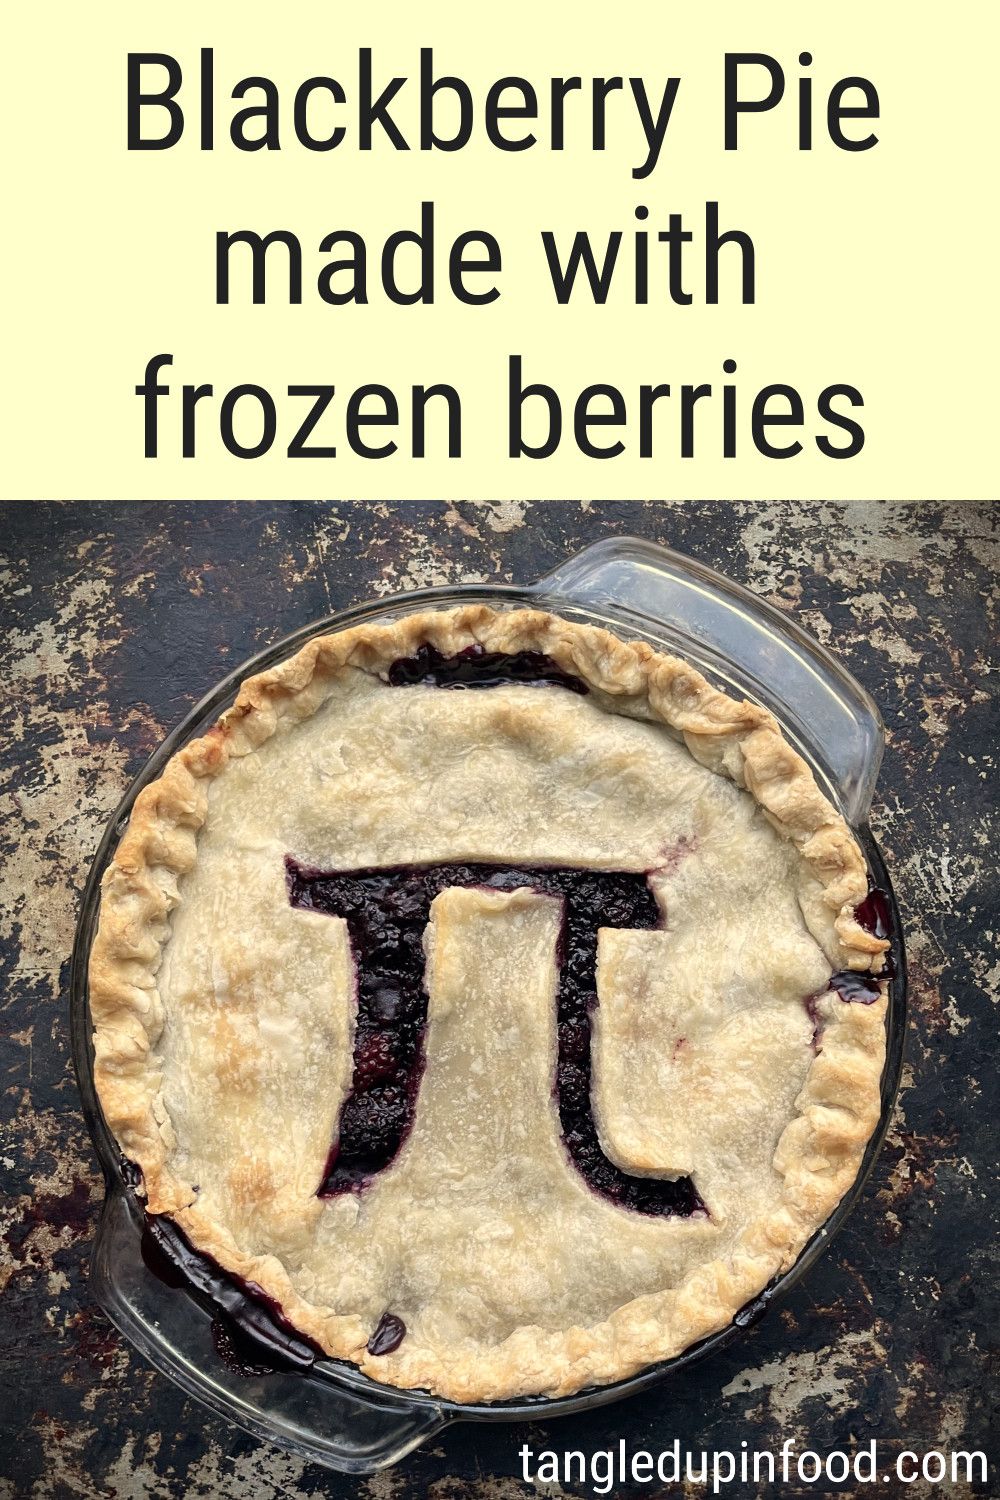 Photo of blackberry pie with a pi symbol cut into the top crust and text reading "Blackberry pie made with frozen berries"